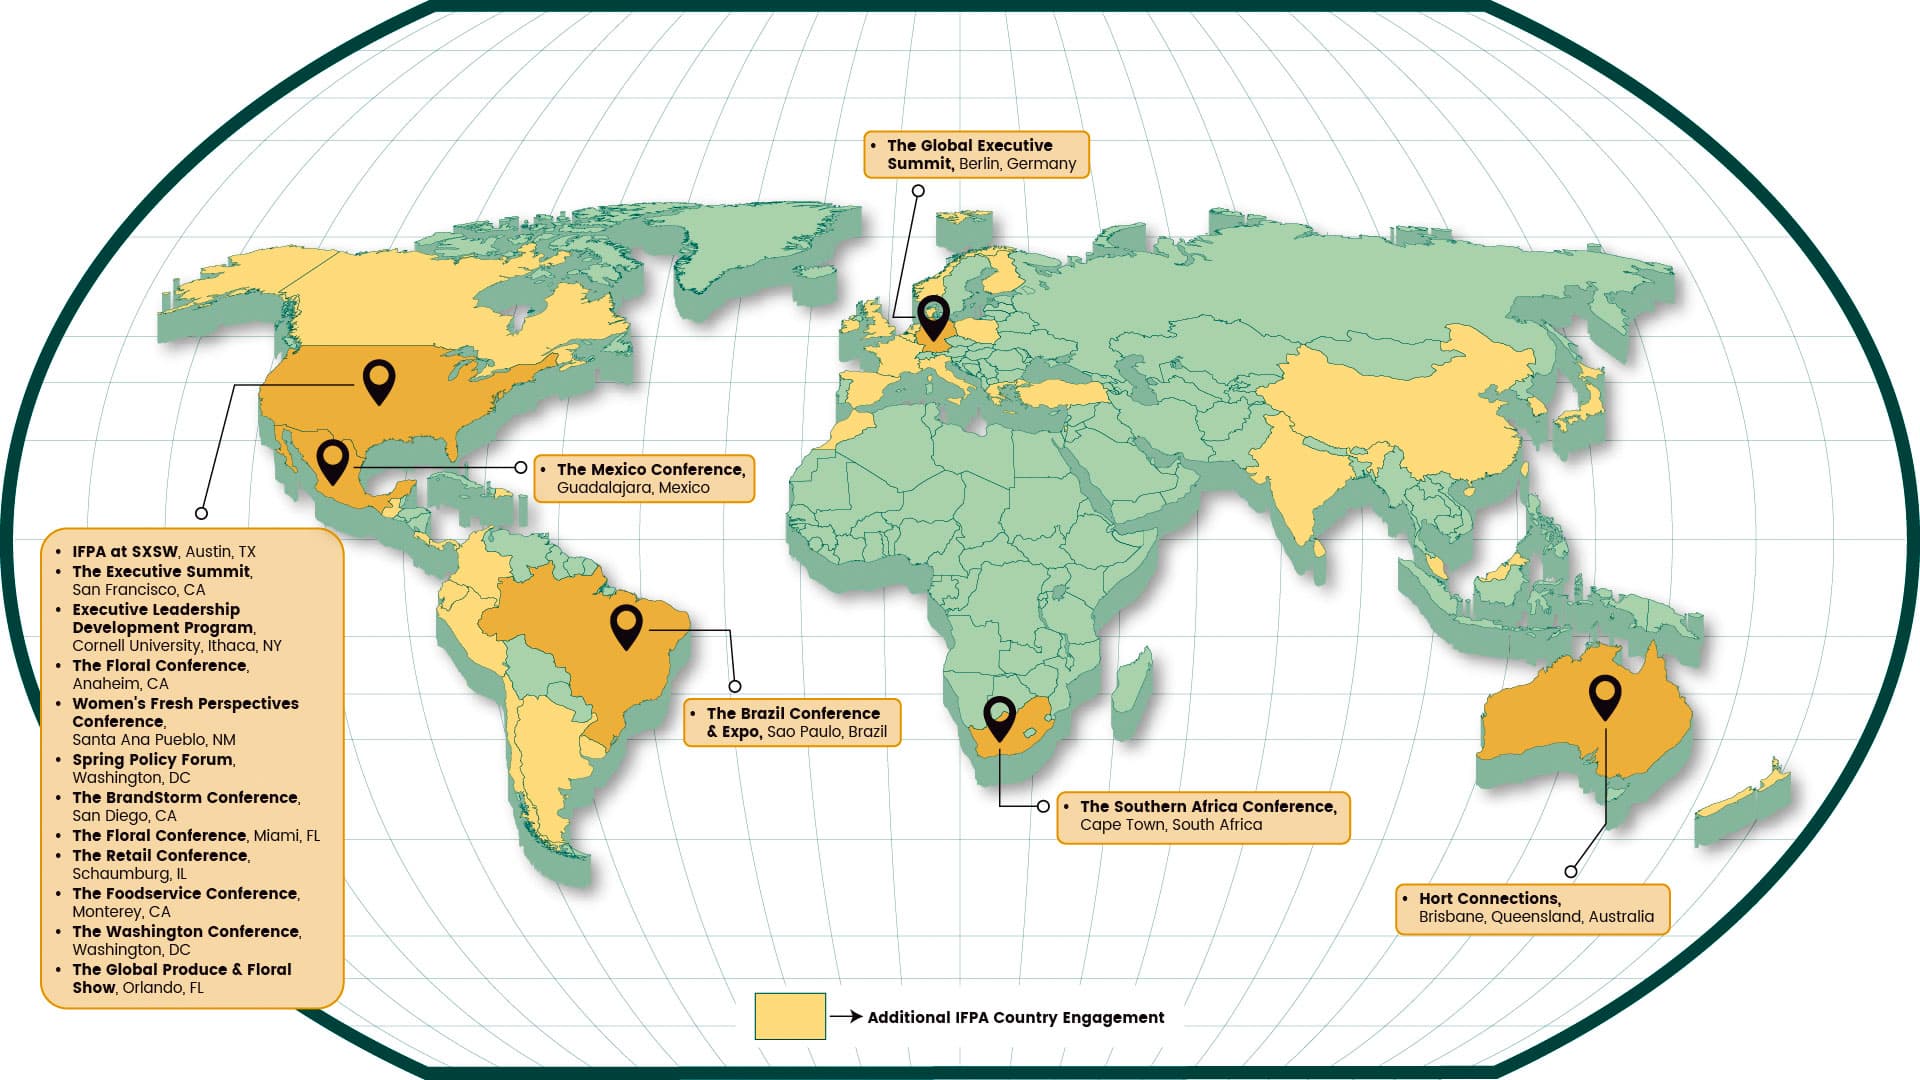 Map of the world depicting locations where IFPA holds events and has members.